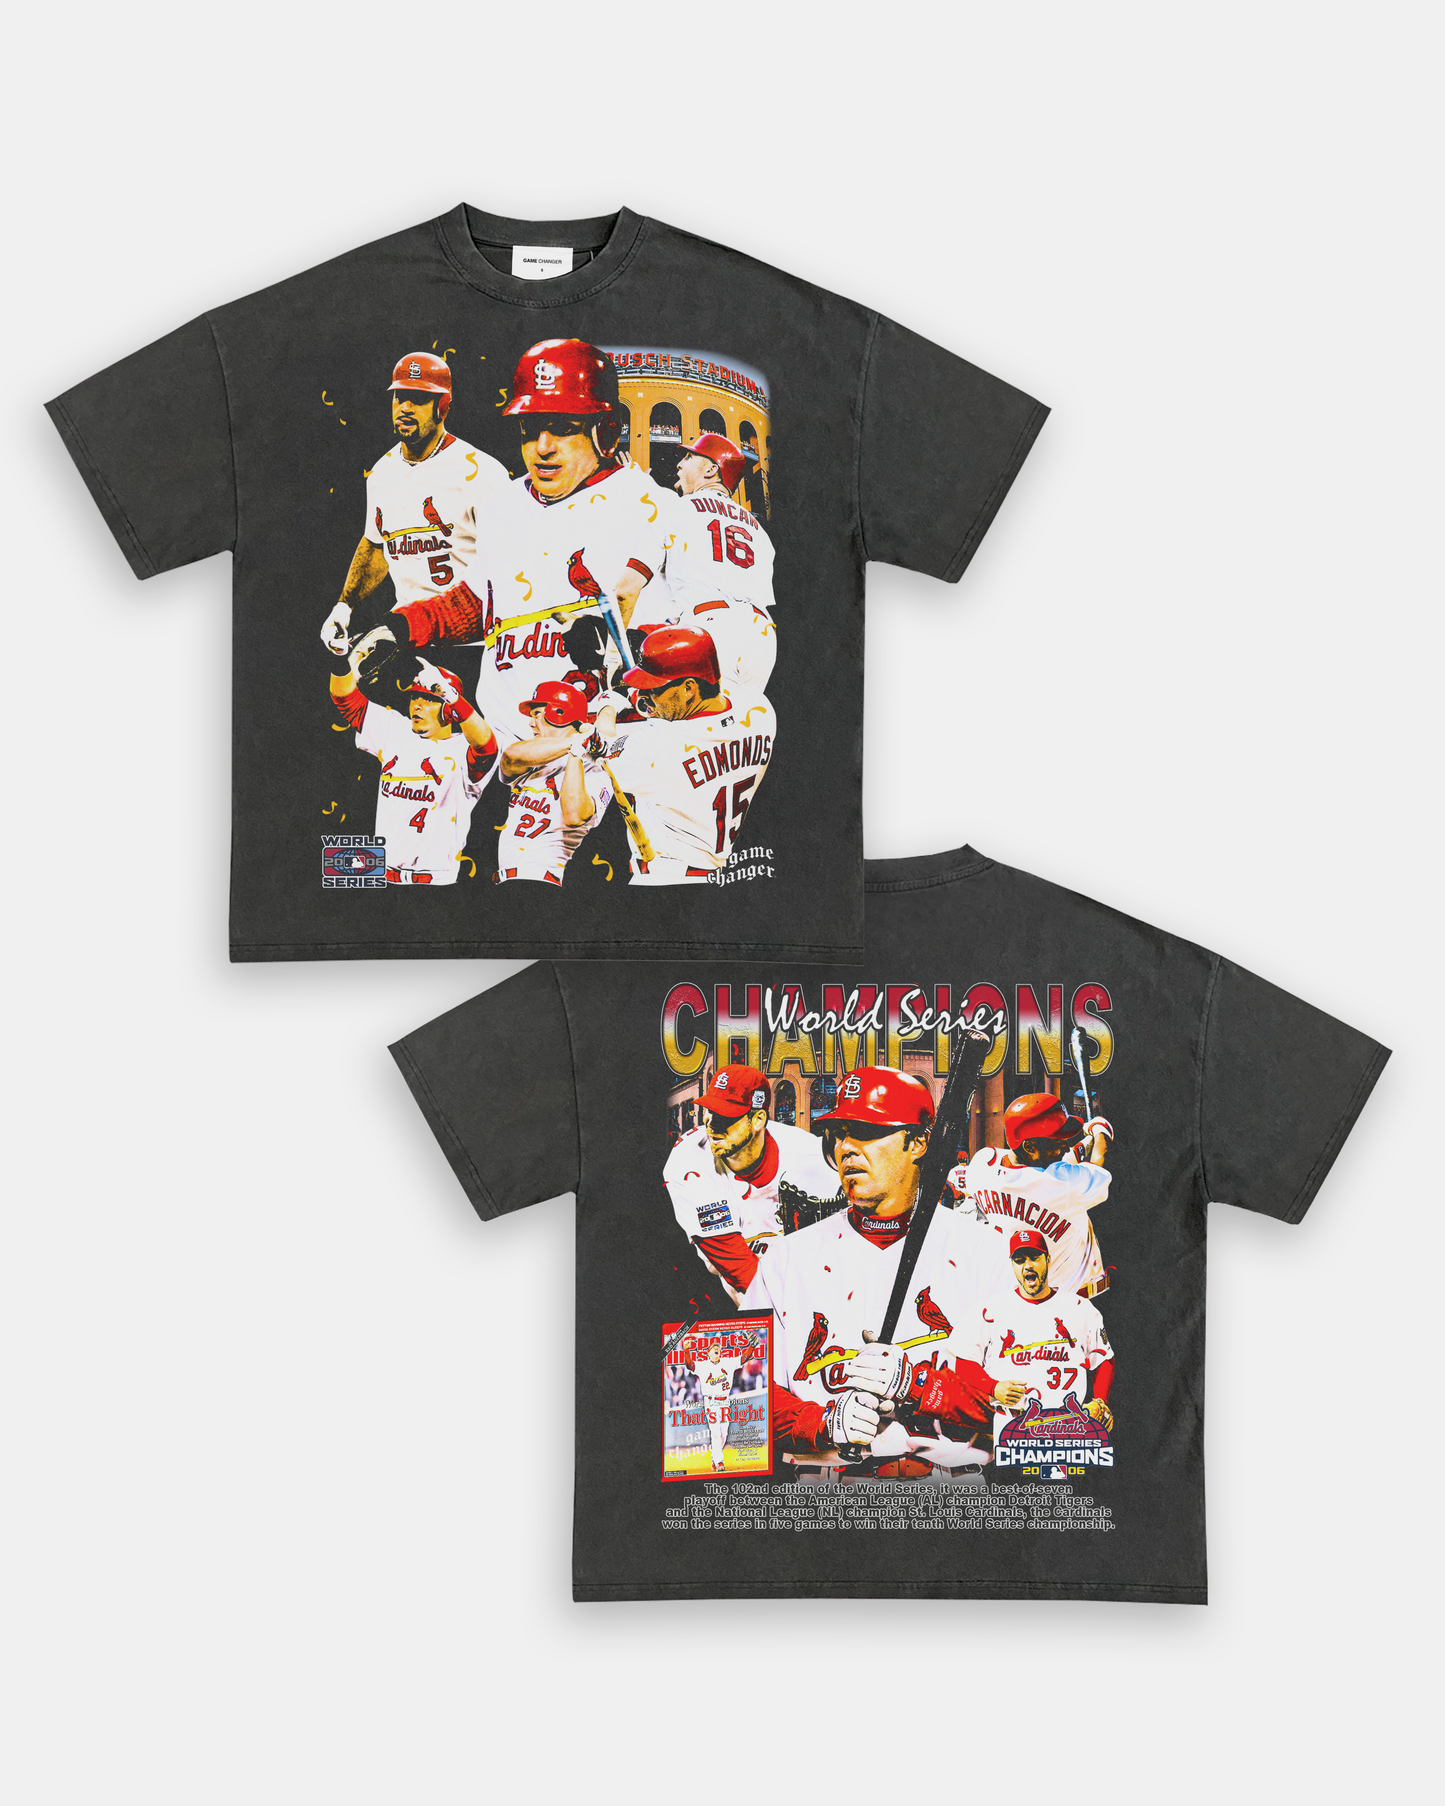 2006 WORLD SERIES CHAMPS - CARDINALS TEE - [DS]